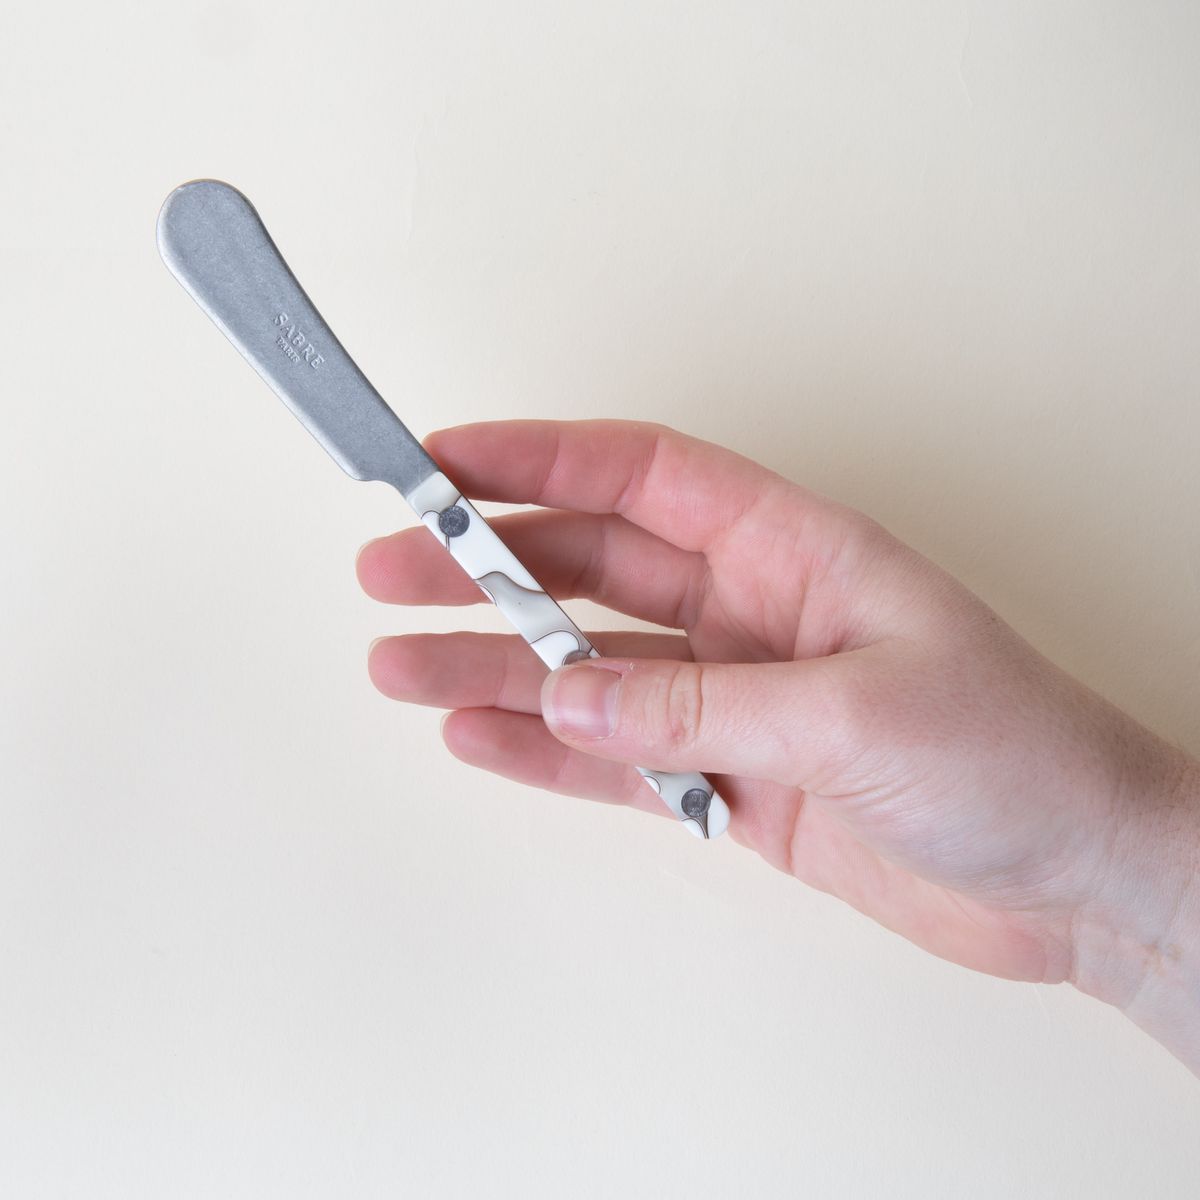 A hand holding a butter knife with a stainless steel blade and an acrylic white and grey handle